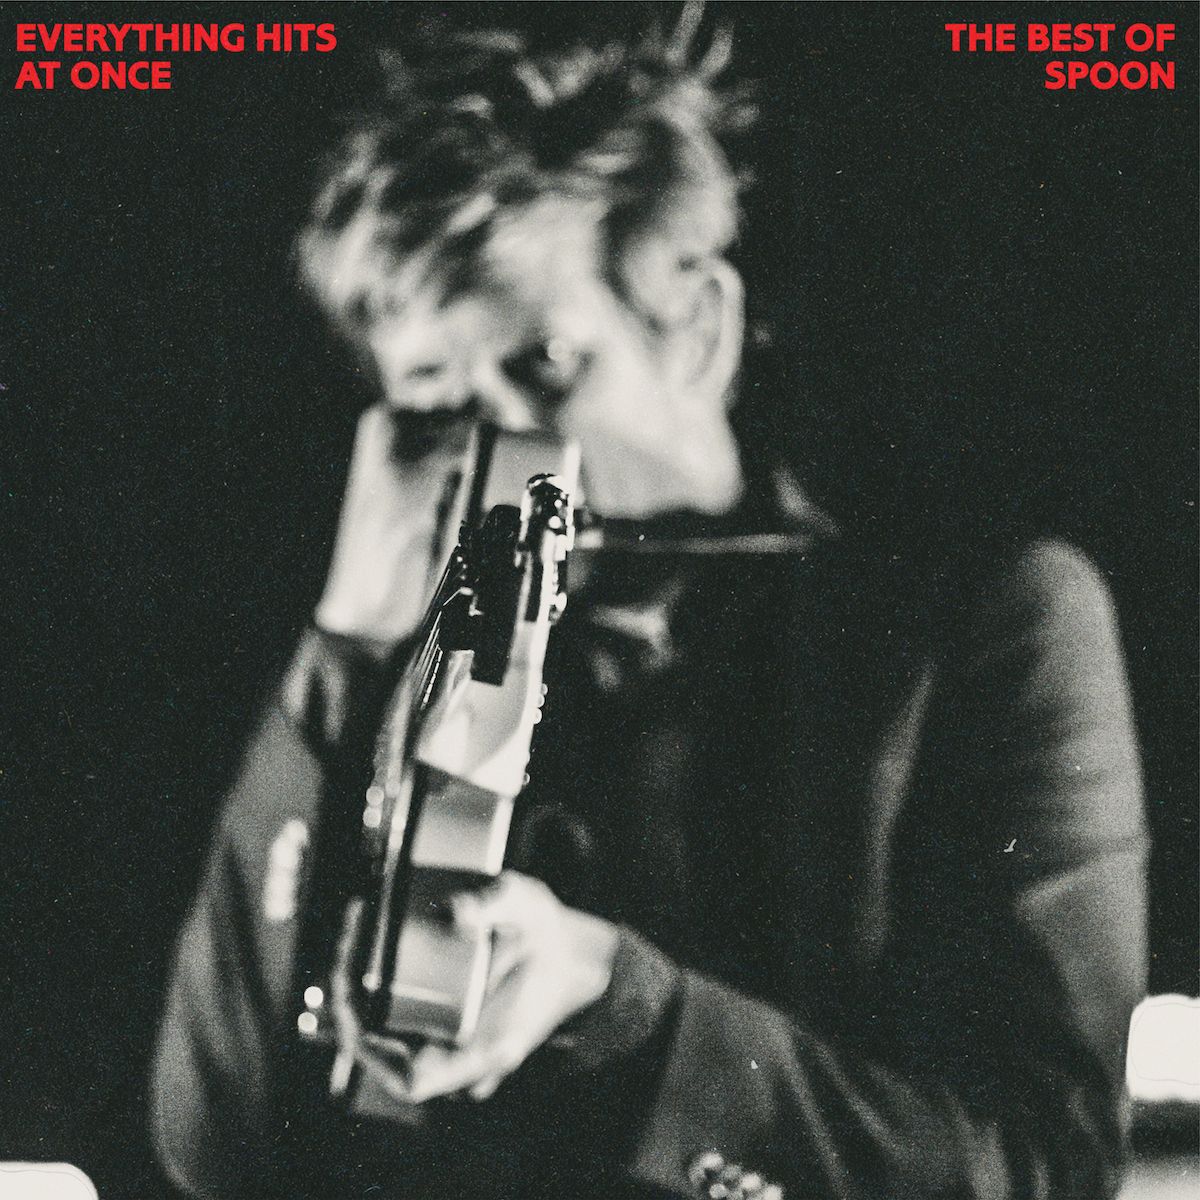 Spoon Everything Hits At once artwork cover physical